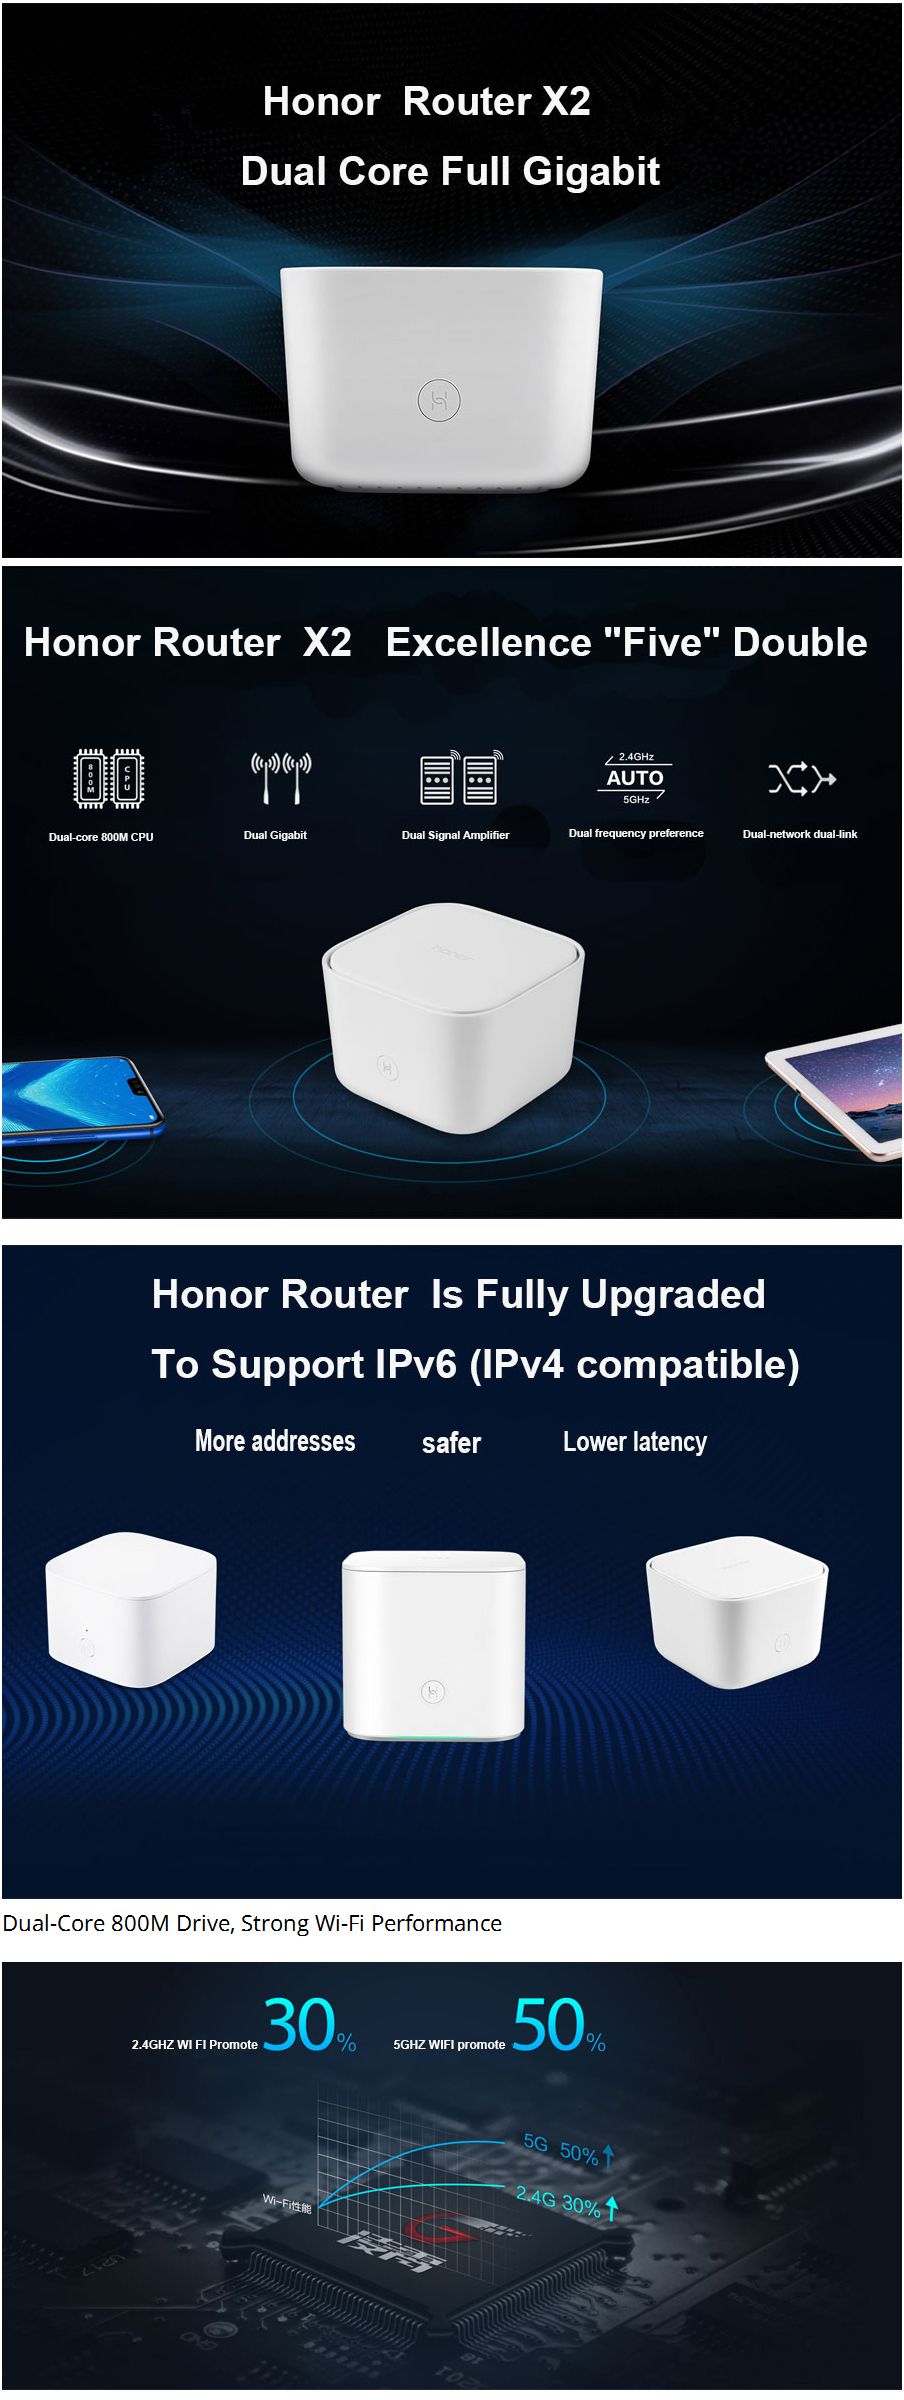 Honor-Router-X2-Dual-Core-Dual-Gigabit-Router-1200M-Dual-band-Wireless-WiFi-5G-Router-High-speed-Hom-1623165